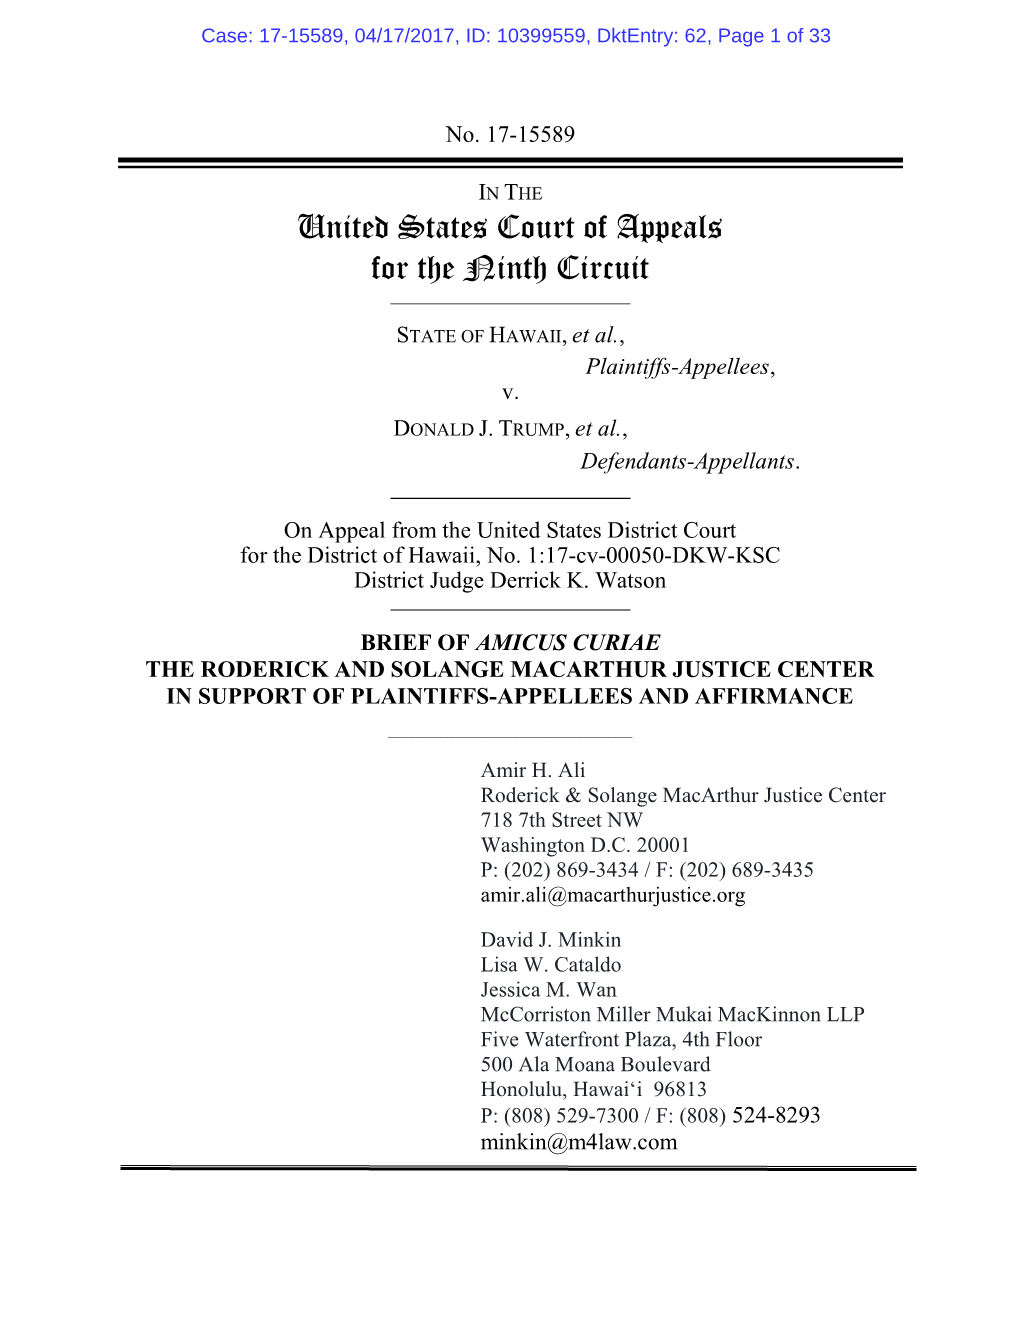 Brief of Amicus Curiae the Roderick and Solange Macarthur Justice Center in Support of Plaintiffs-Appellees and Affirmance